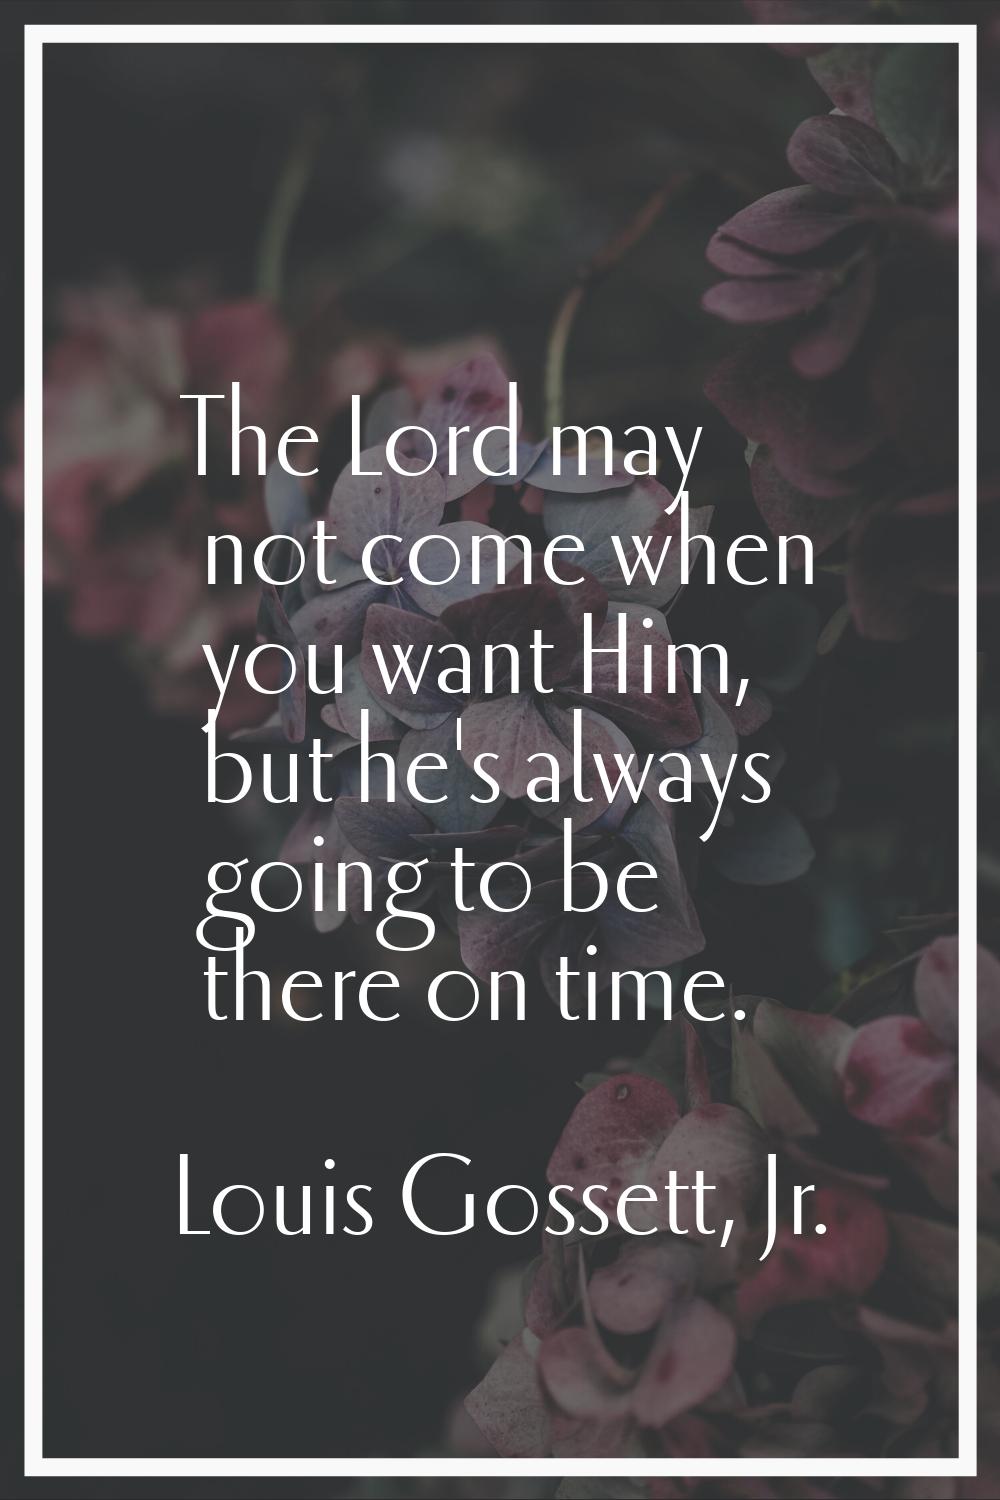 The Lord may not come when you want Him, but he's always going to be there on time.